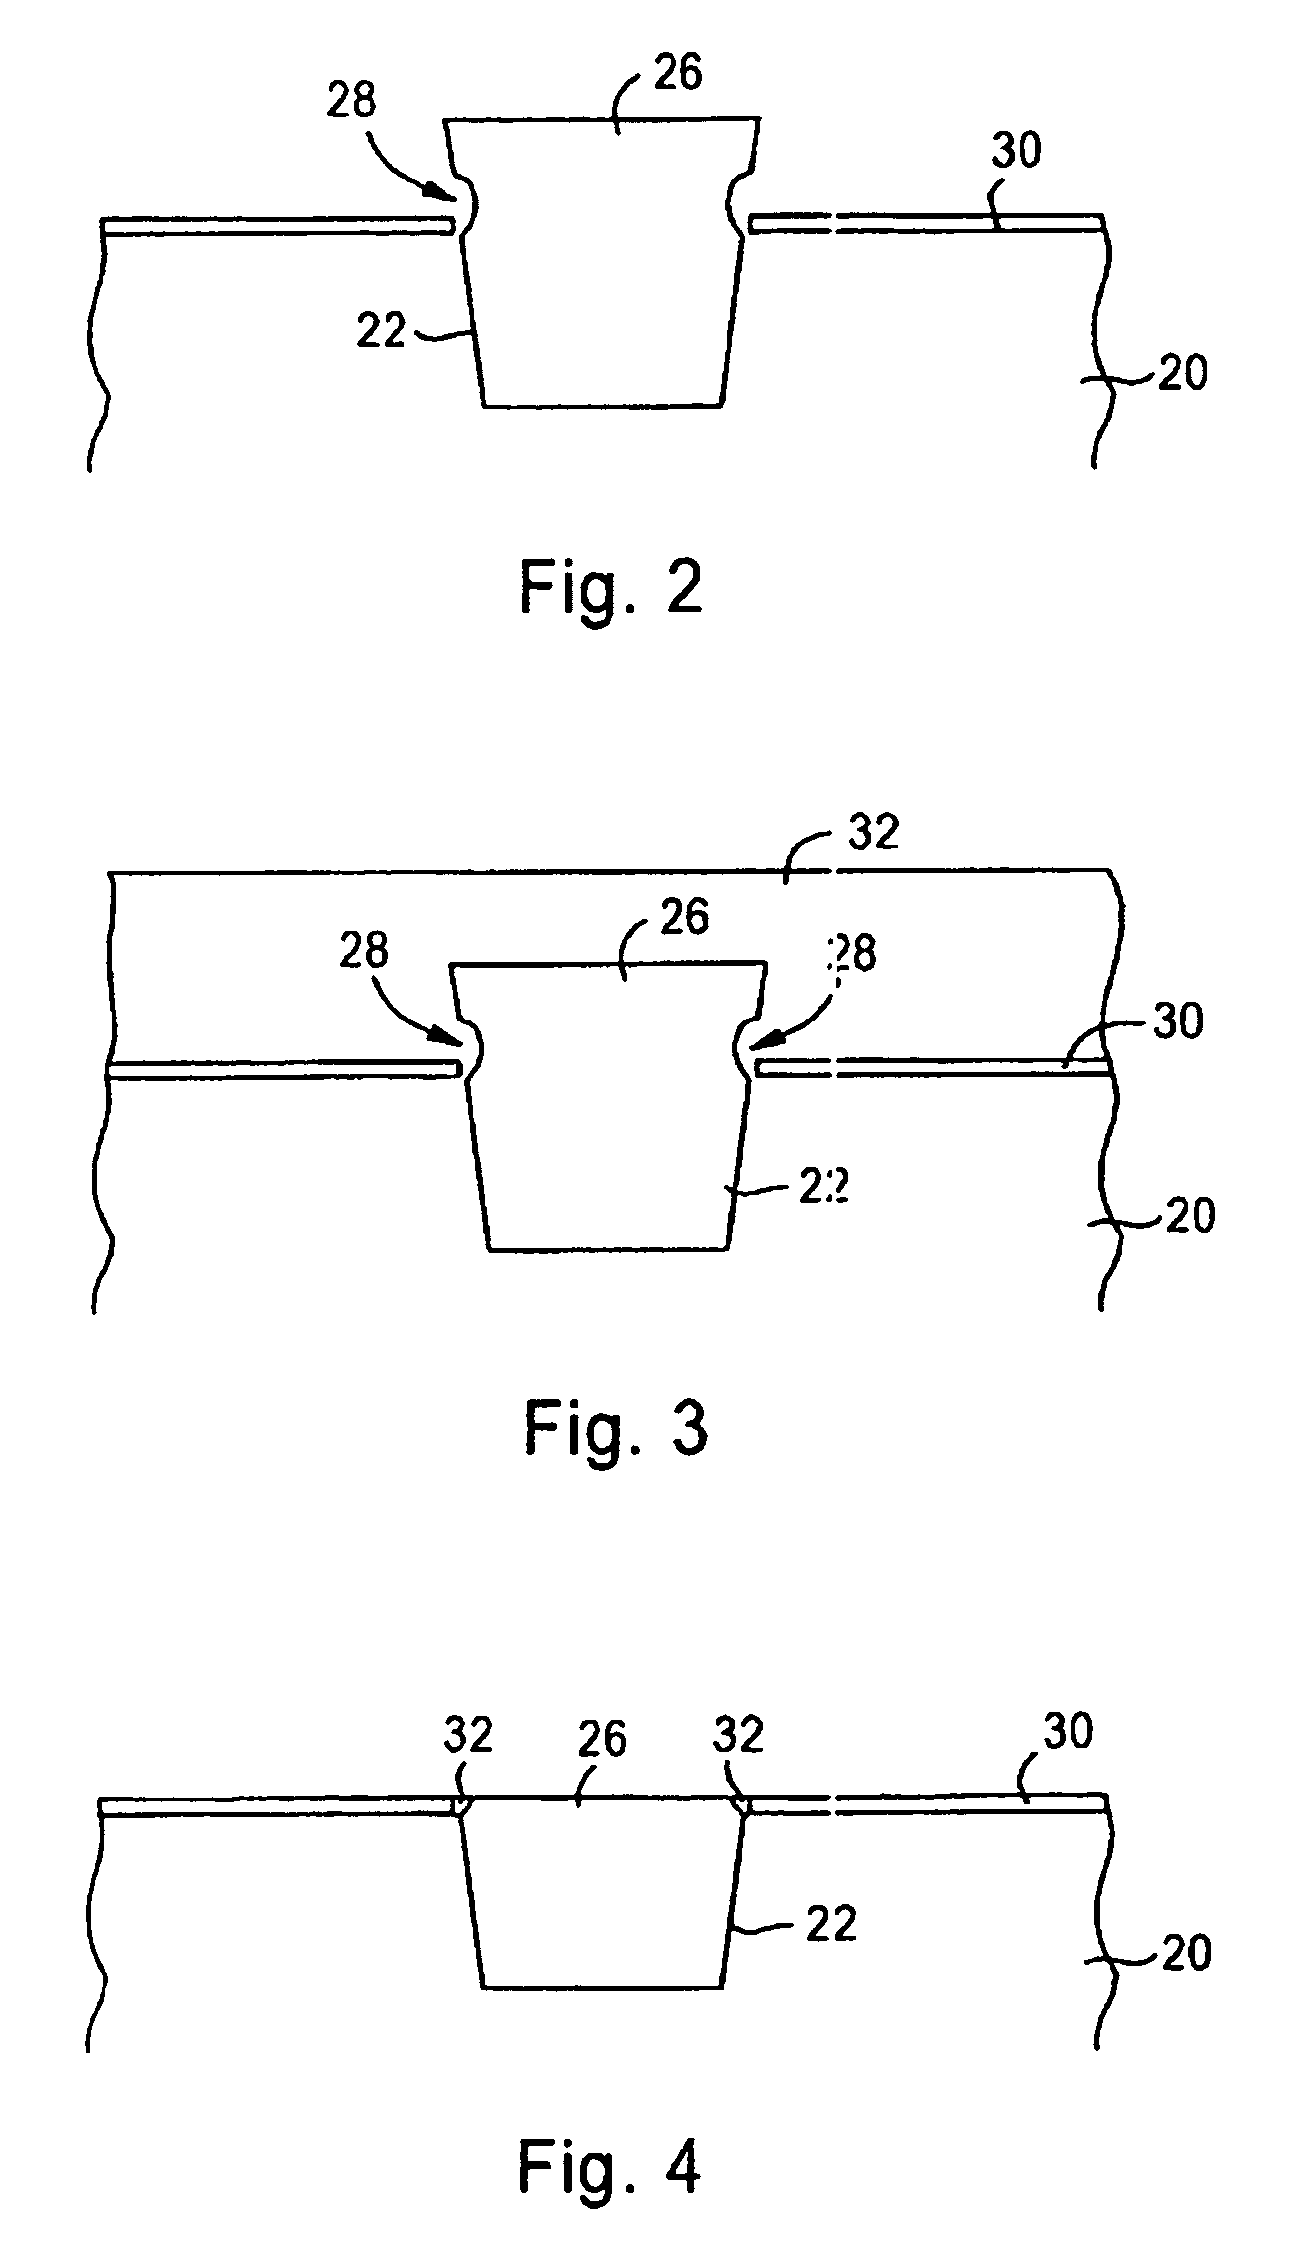 Method of forming a semiconductor arrangement with reduced field-to active step height